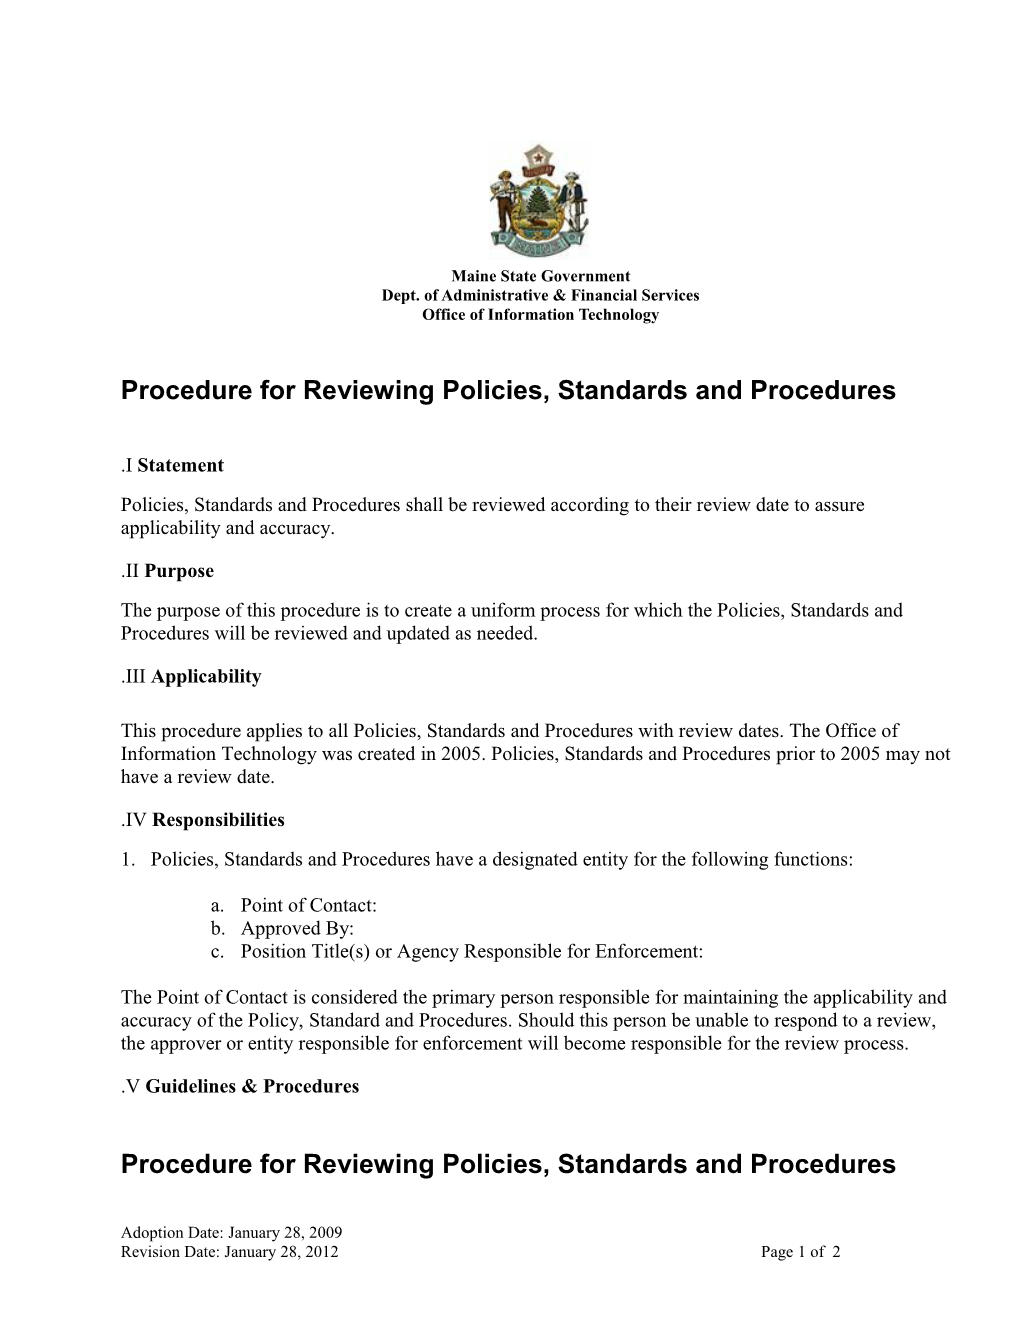 Procedure for Reviewing Policies, Standards and Procedures